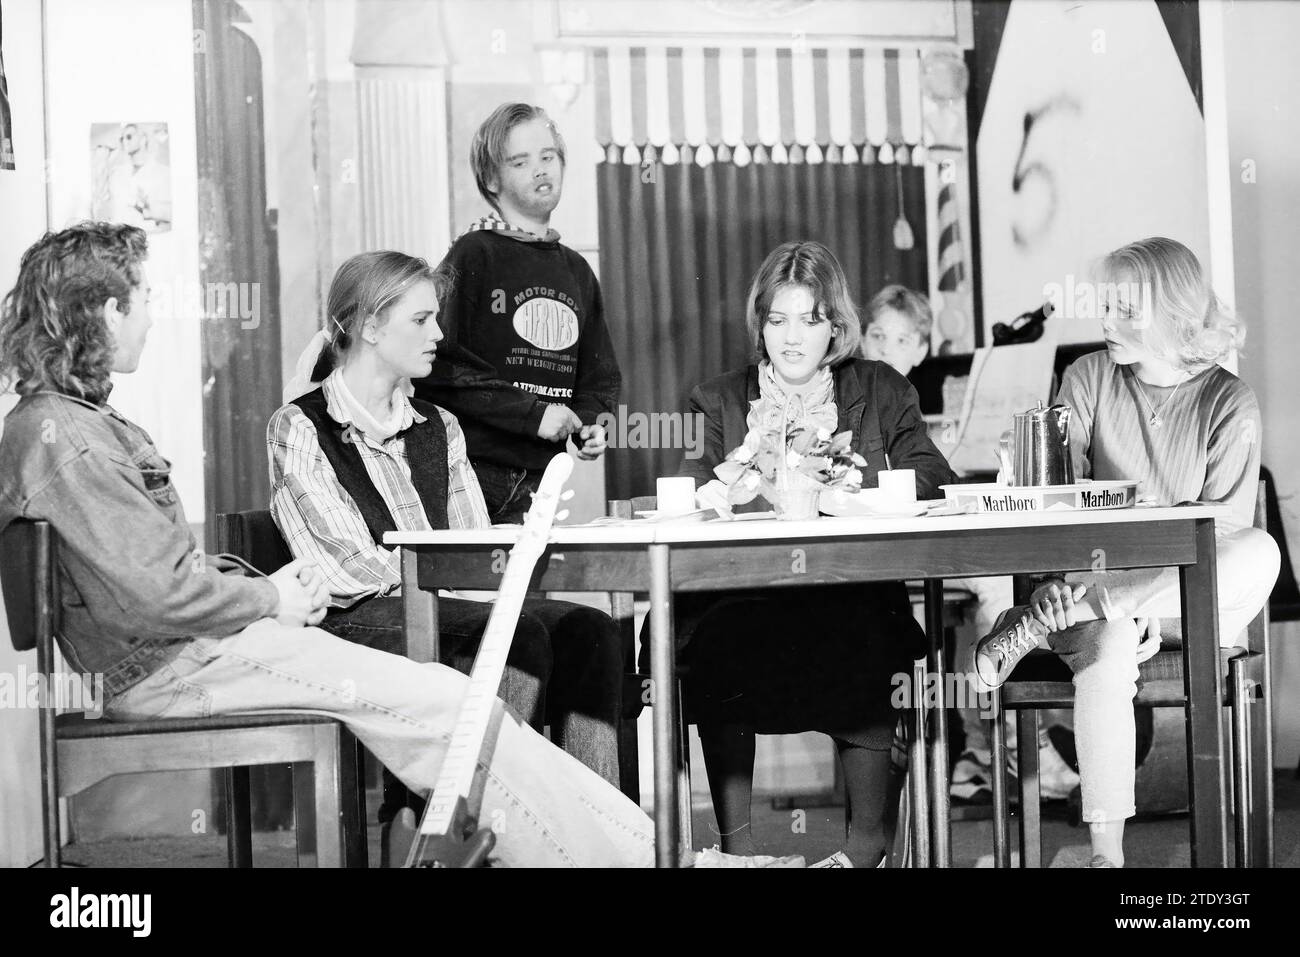 Youth theater in Vogelzang, Vogelenzang, 03-04-1993, Whizgle News from the Past, Tailored for the Future. Explore historical narratives, Dutch The Netherlands agency image with a modern perspective, bridging the gap between yesterday's events and tomorrow's insights. A timeless journey shaping the stories that shape our future. Stock Photo